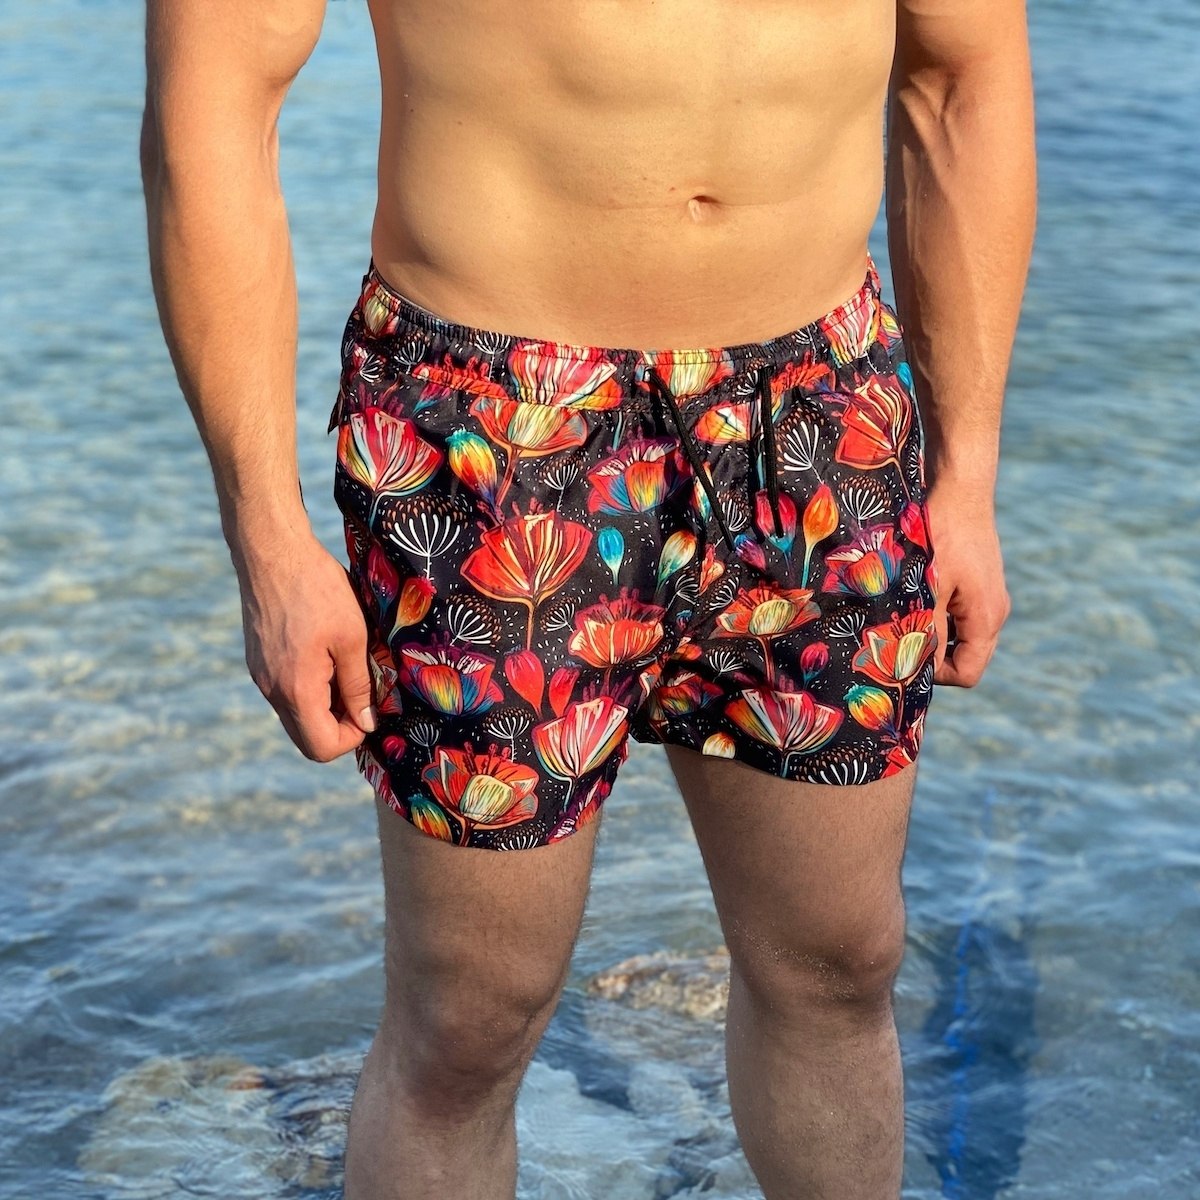 Men's Swimming Short With Floral Patterns